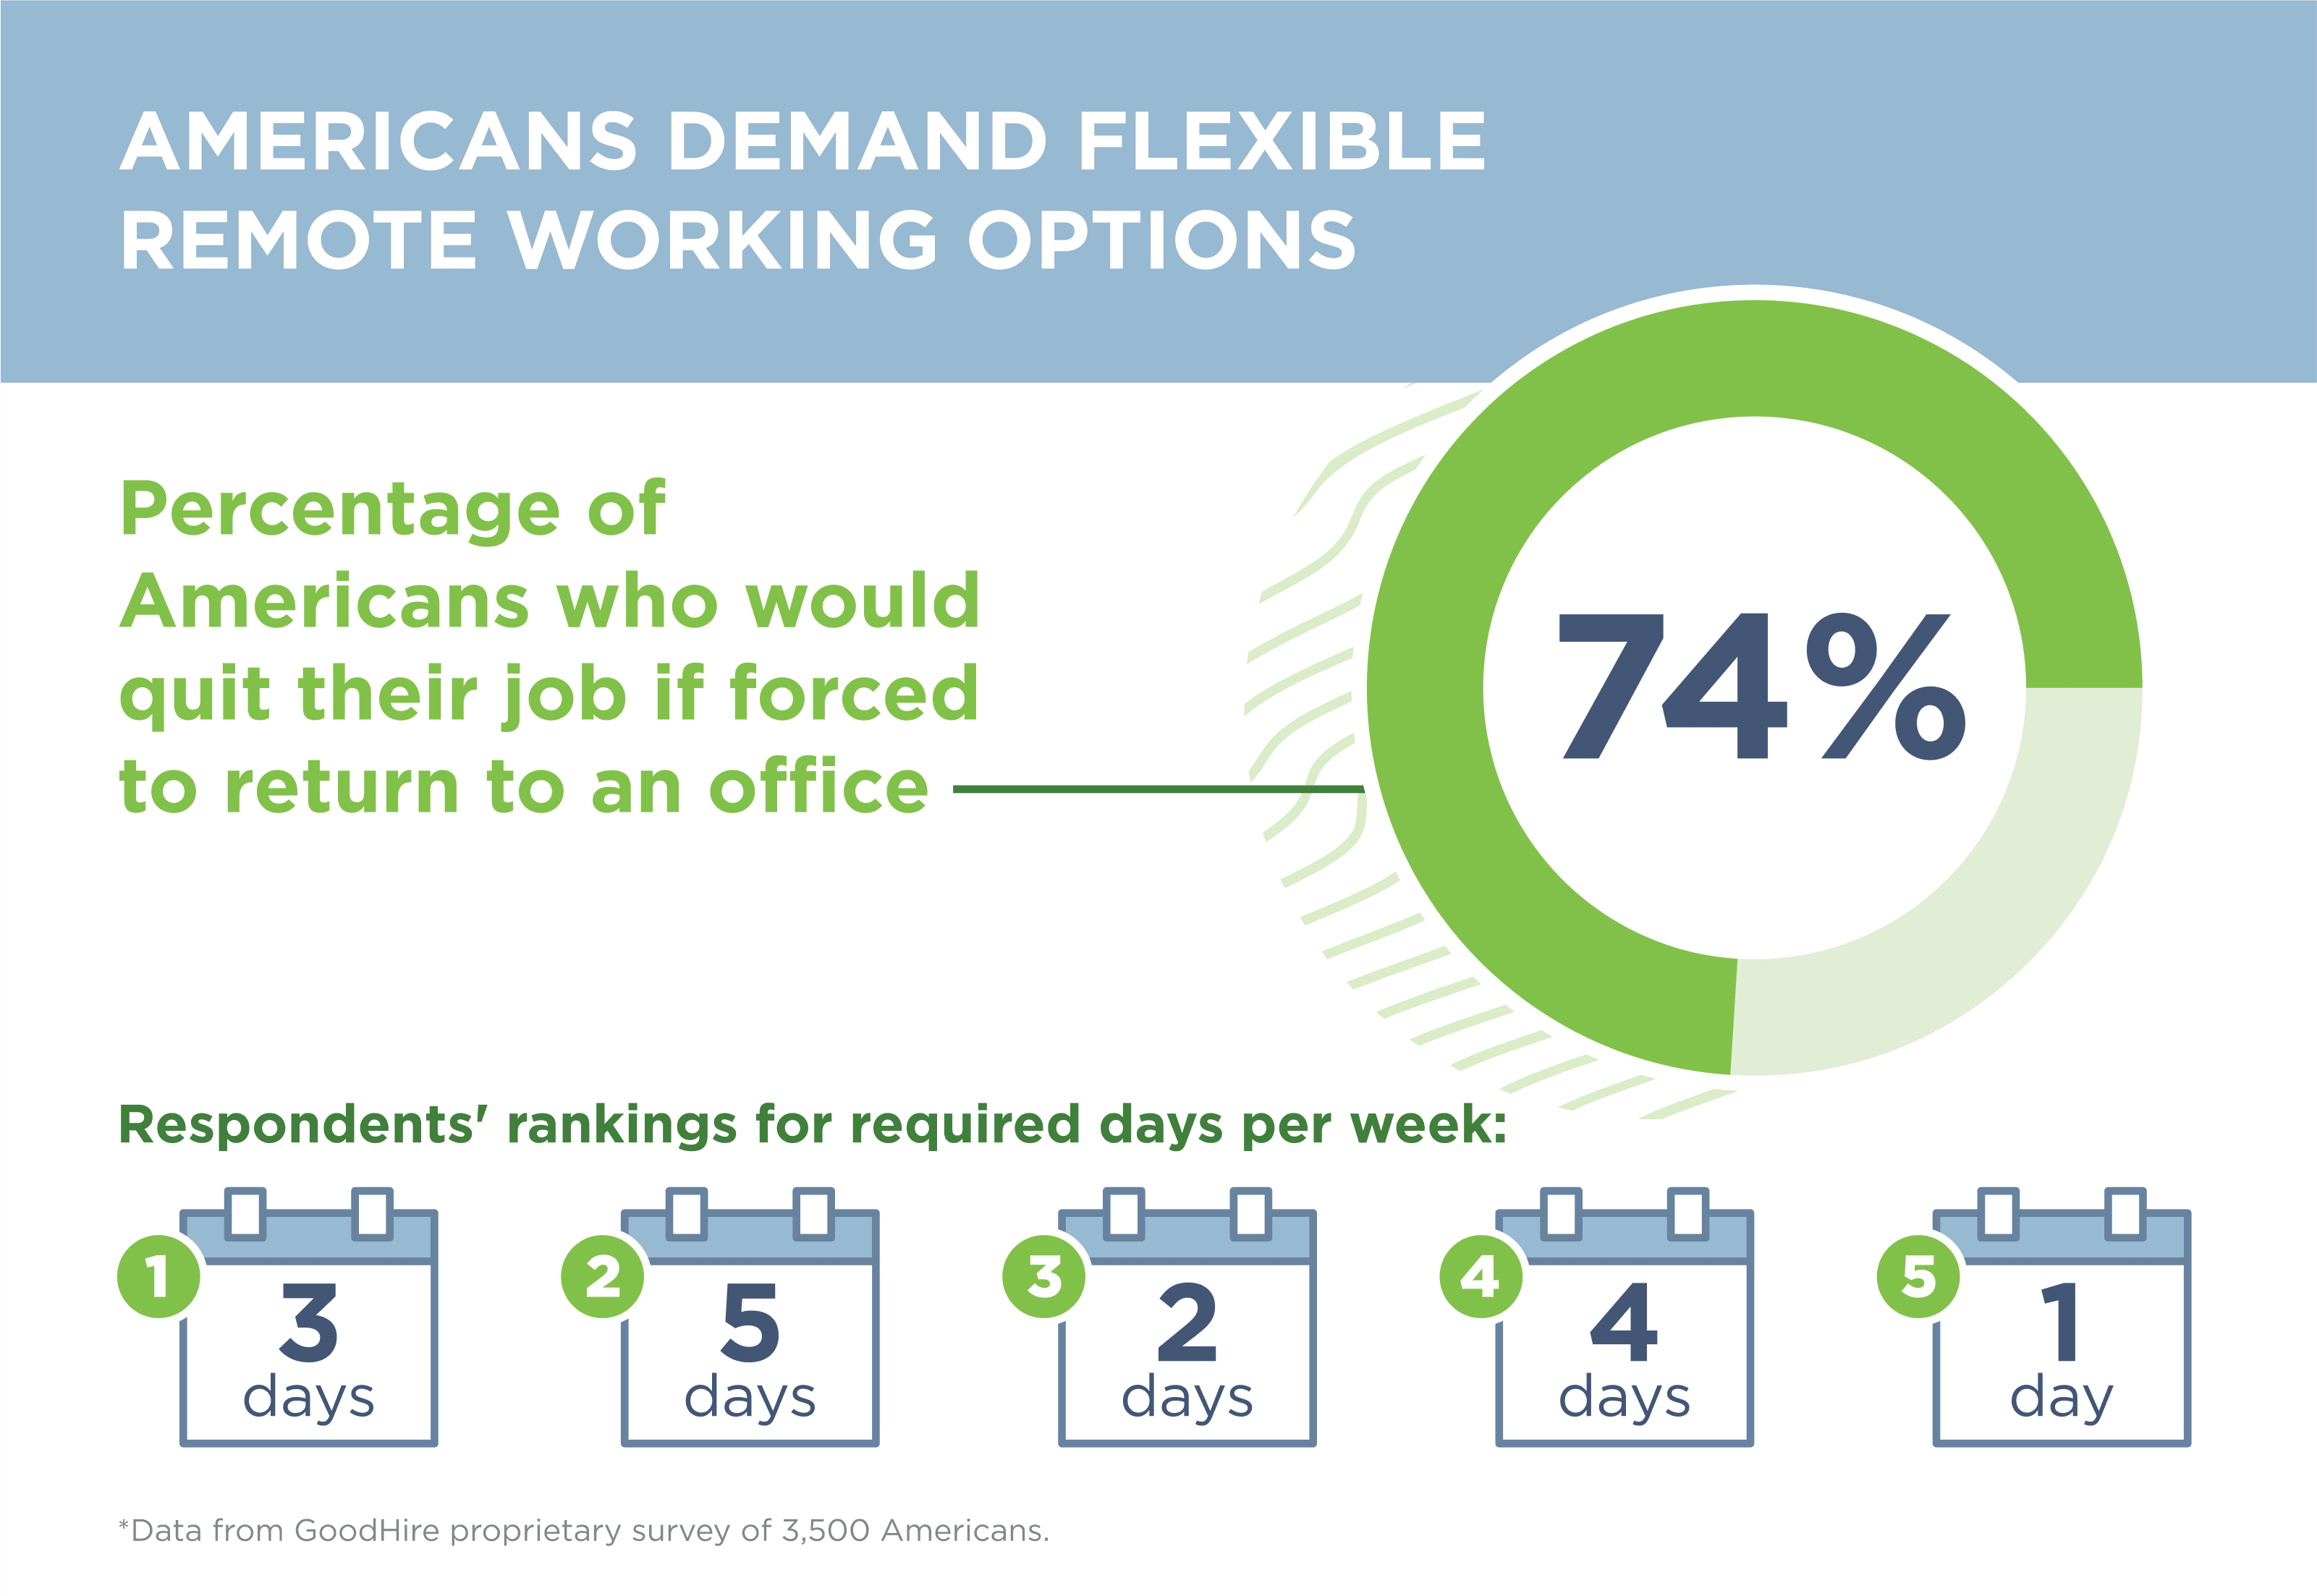 Graphs shows 74% of respondents need remote working options to stay at their current job